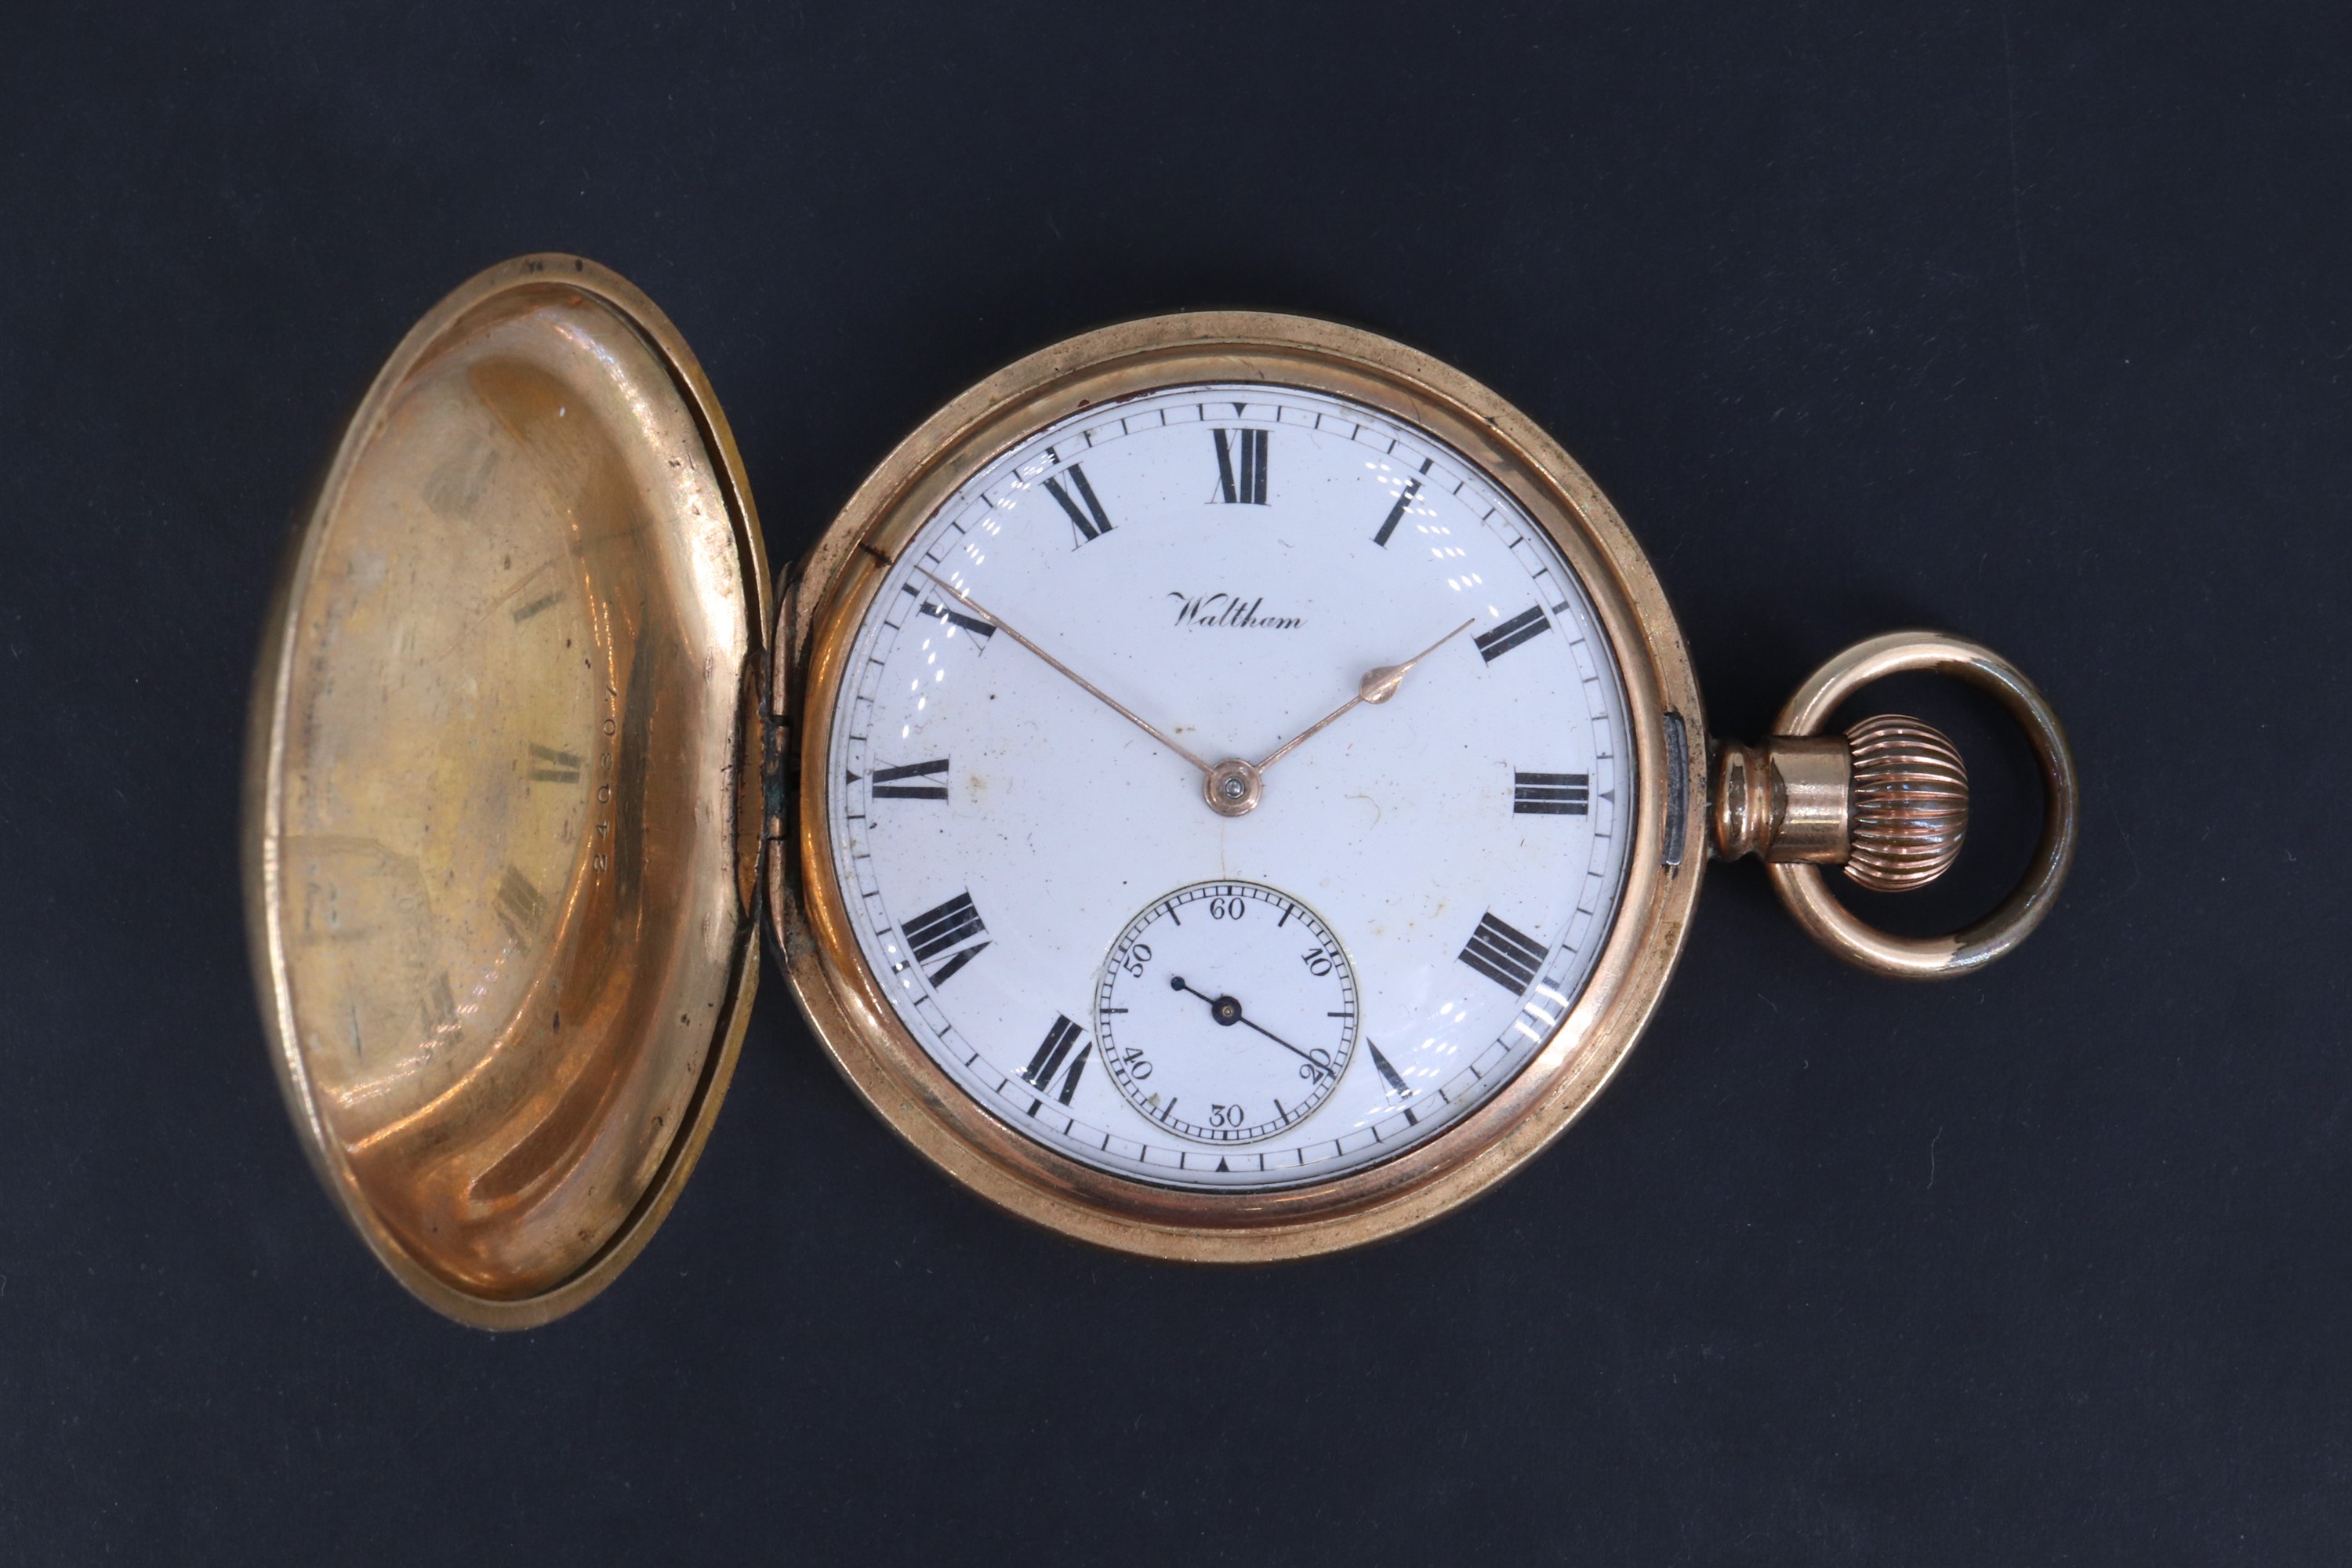 A Waltham gold-plated hunter pocket watch, early 20th Century, 50 mm excluding stem and bow, (runs